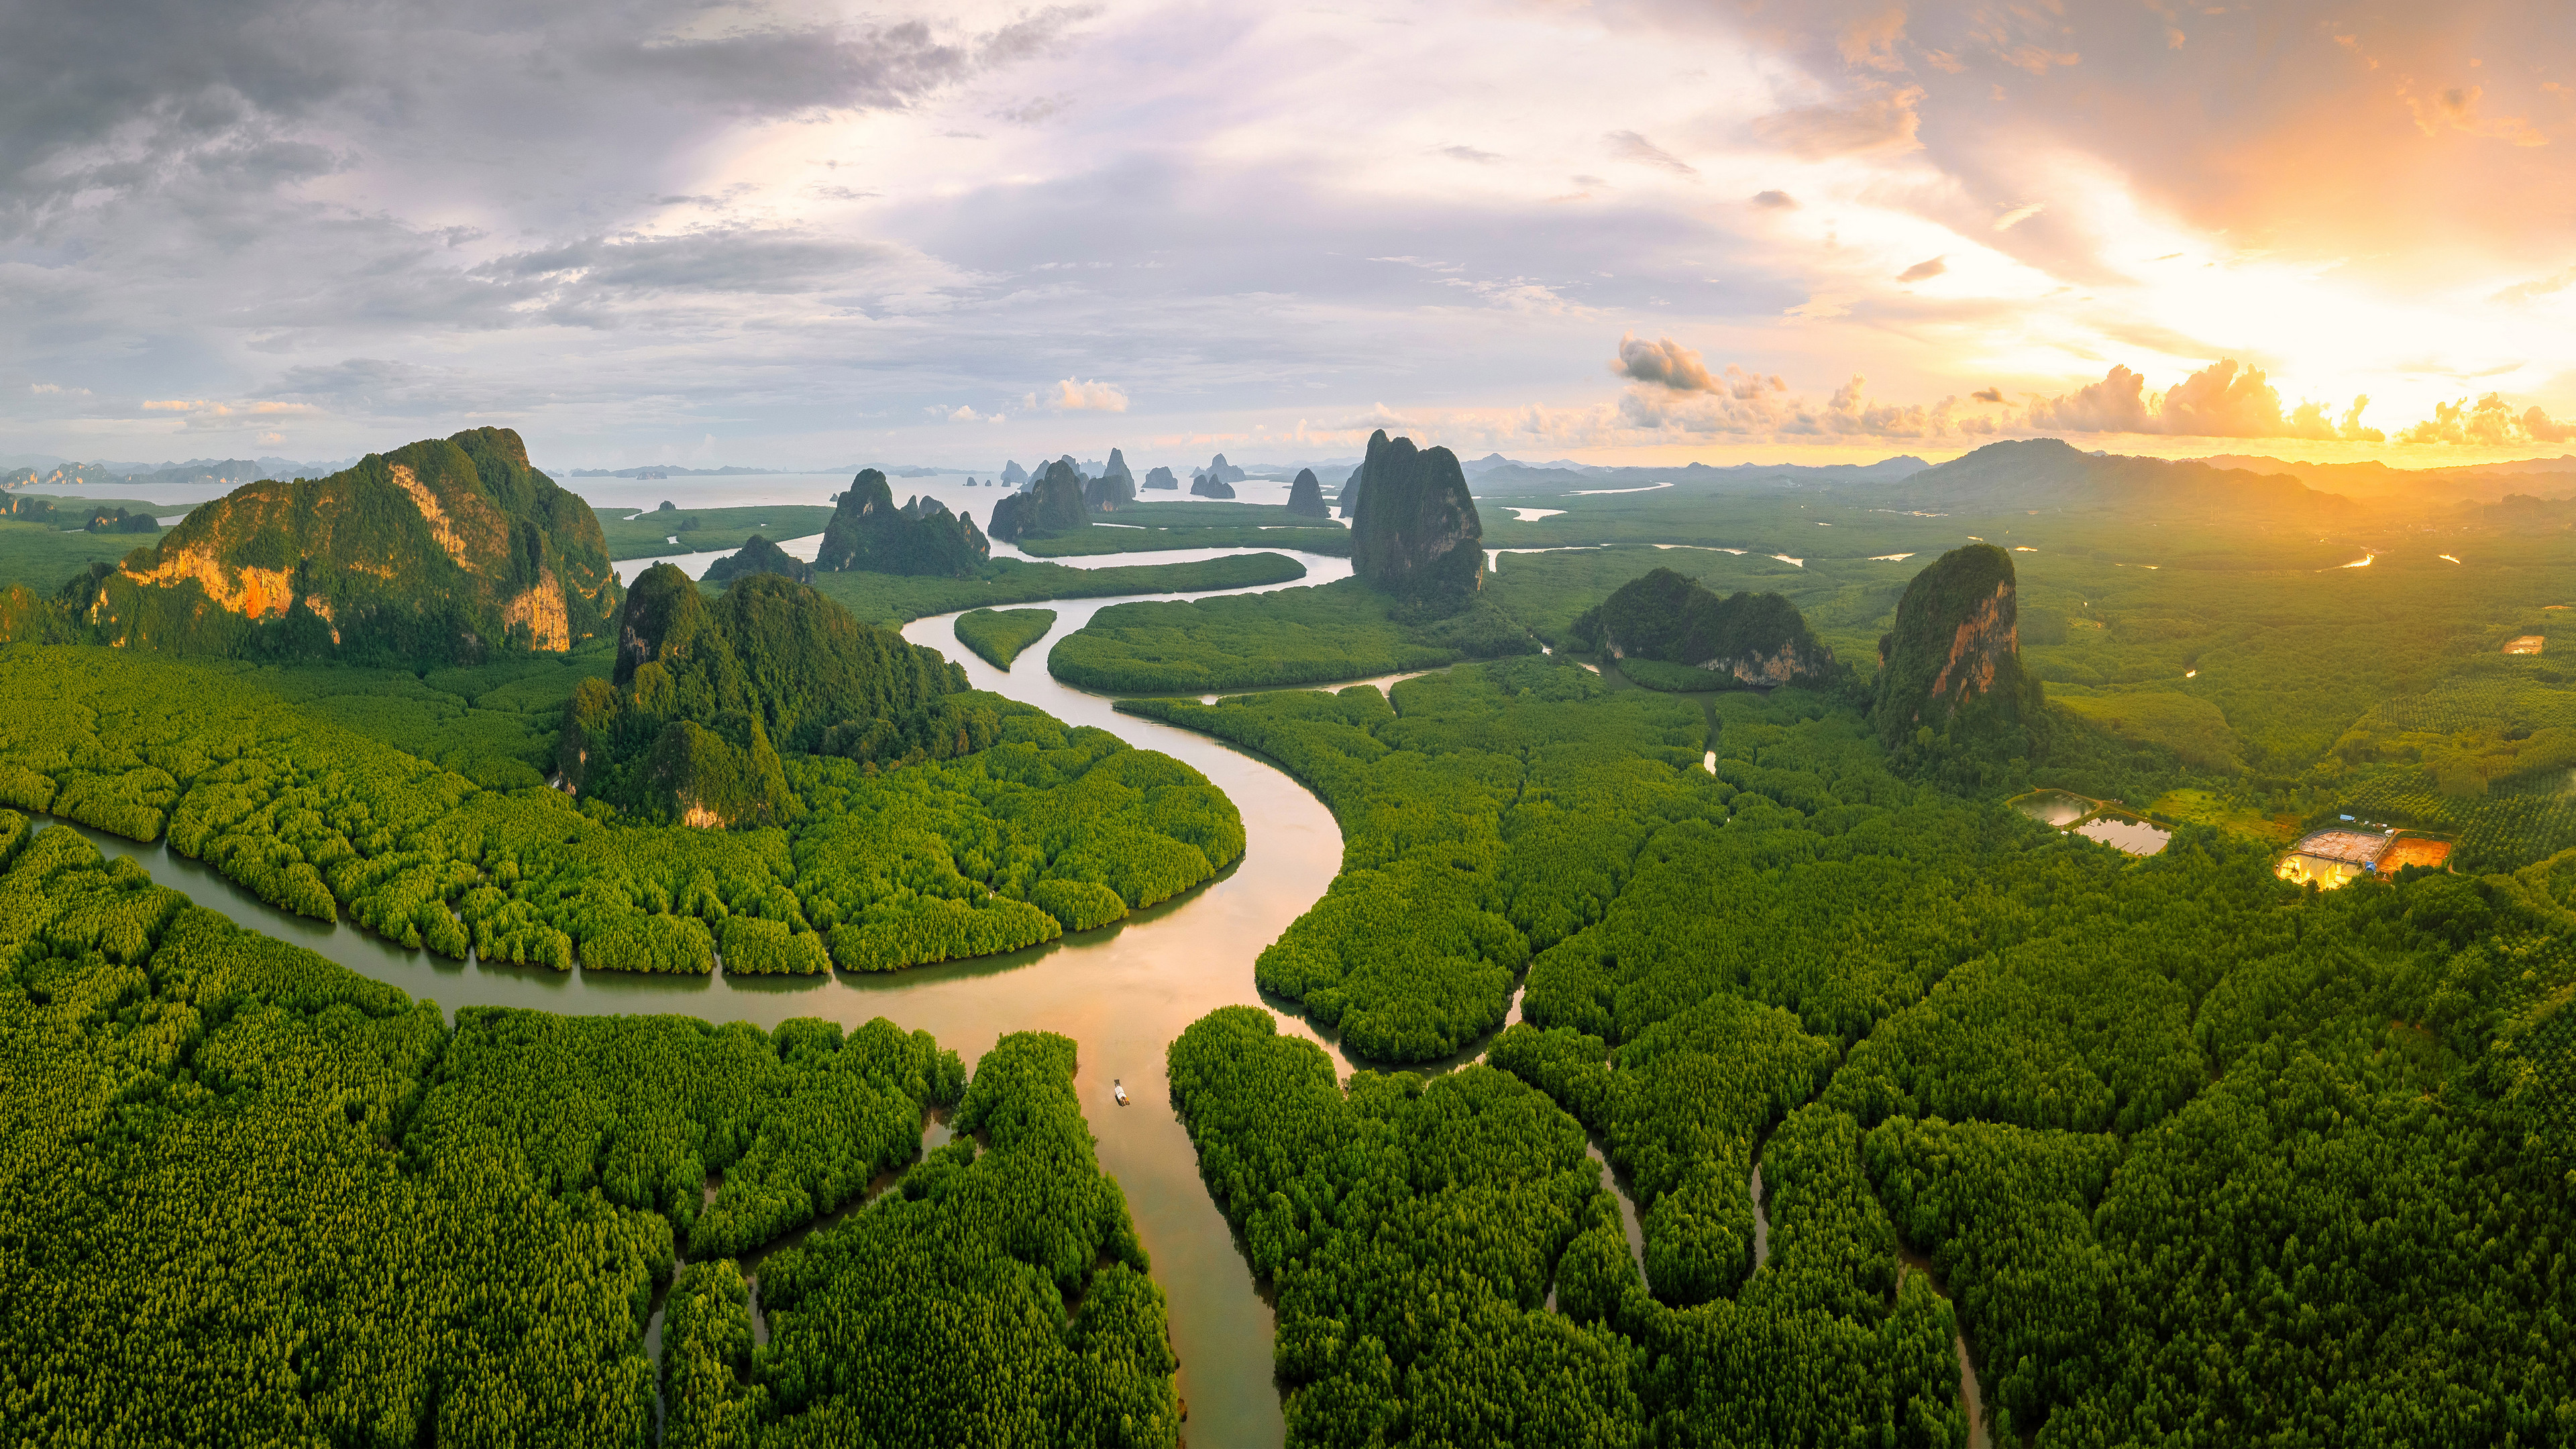 General 3840x2160 Thailand landscape nature river forest rocks mountains sky clouds sunset aerial view